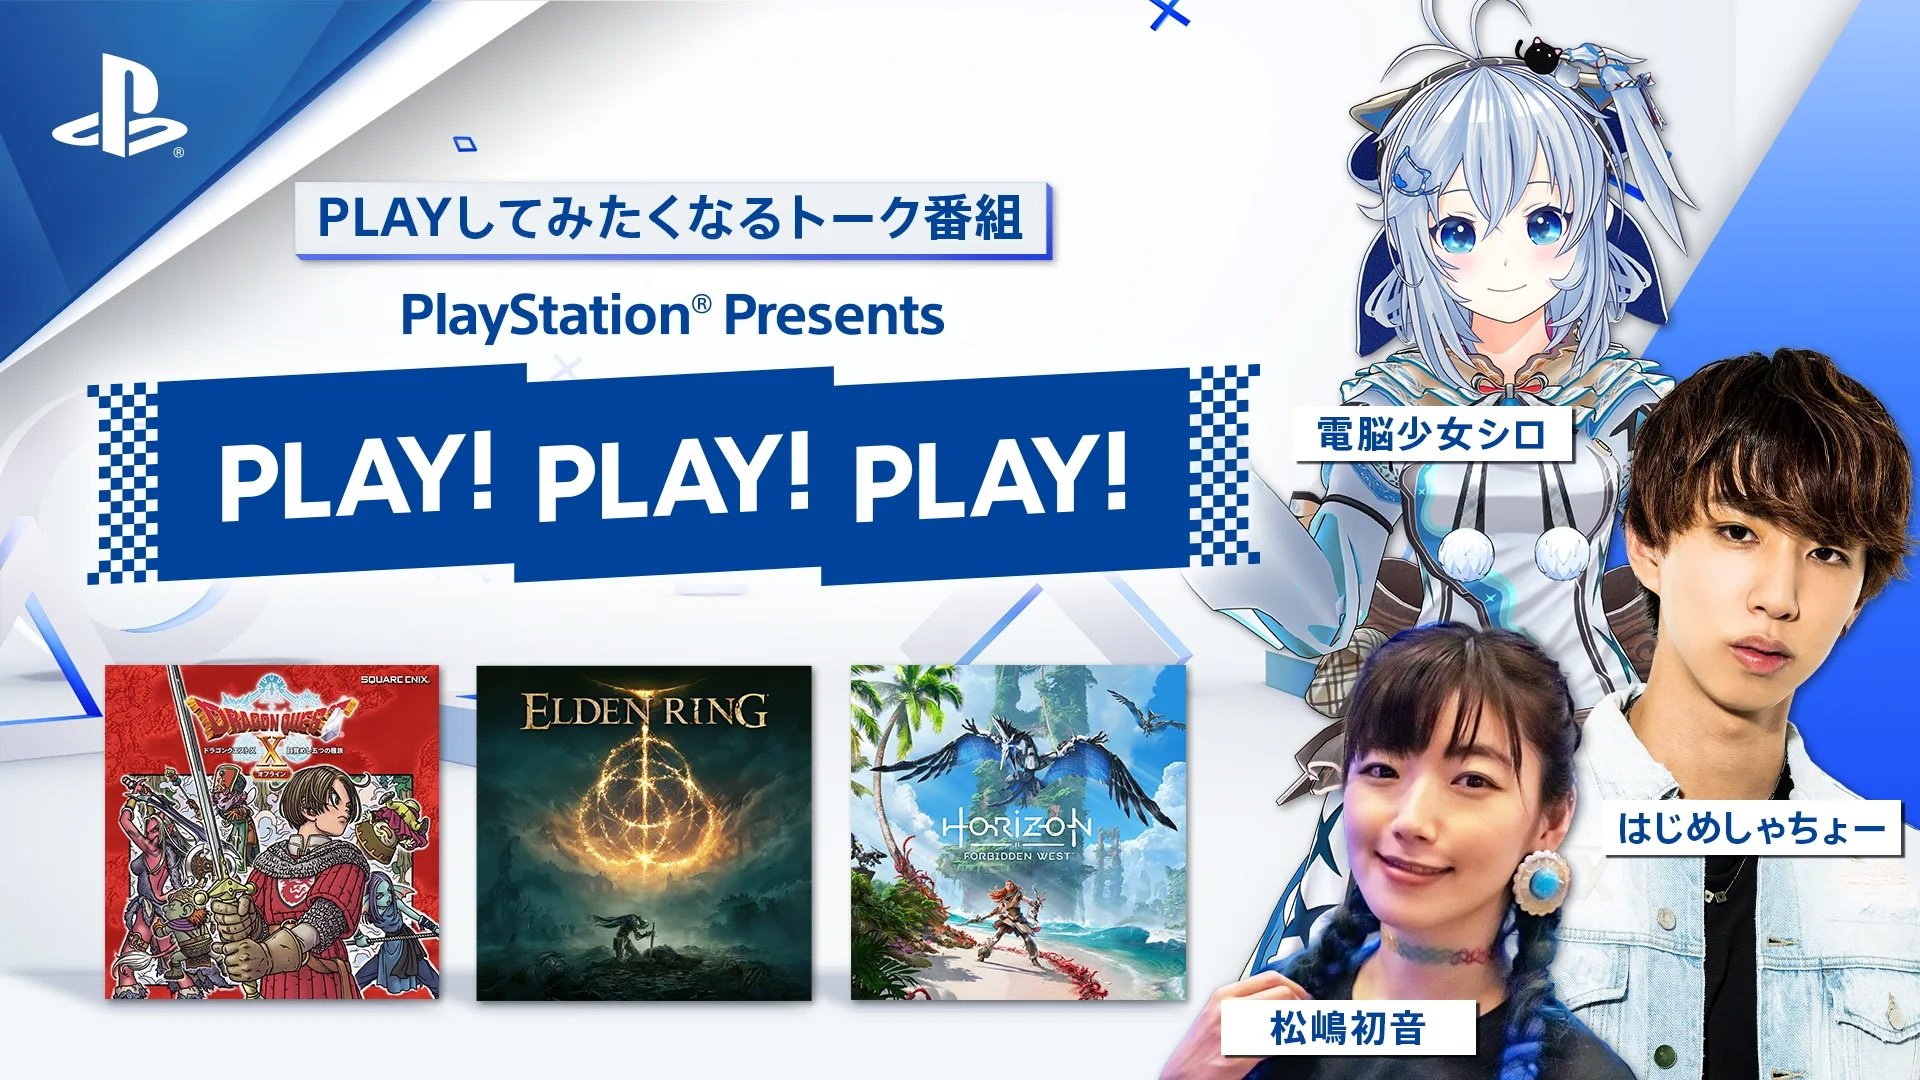 PlayStation Japan ‘Play! Play! Play!’ live stream set for October 16 featuring Dragon Quest X Offline, Elden Ring, and Horizon Forbidden West – Gematsu